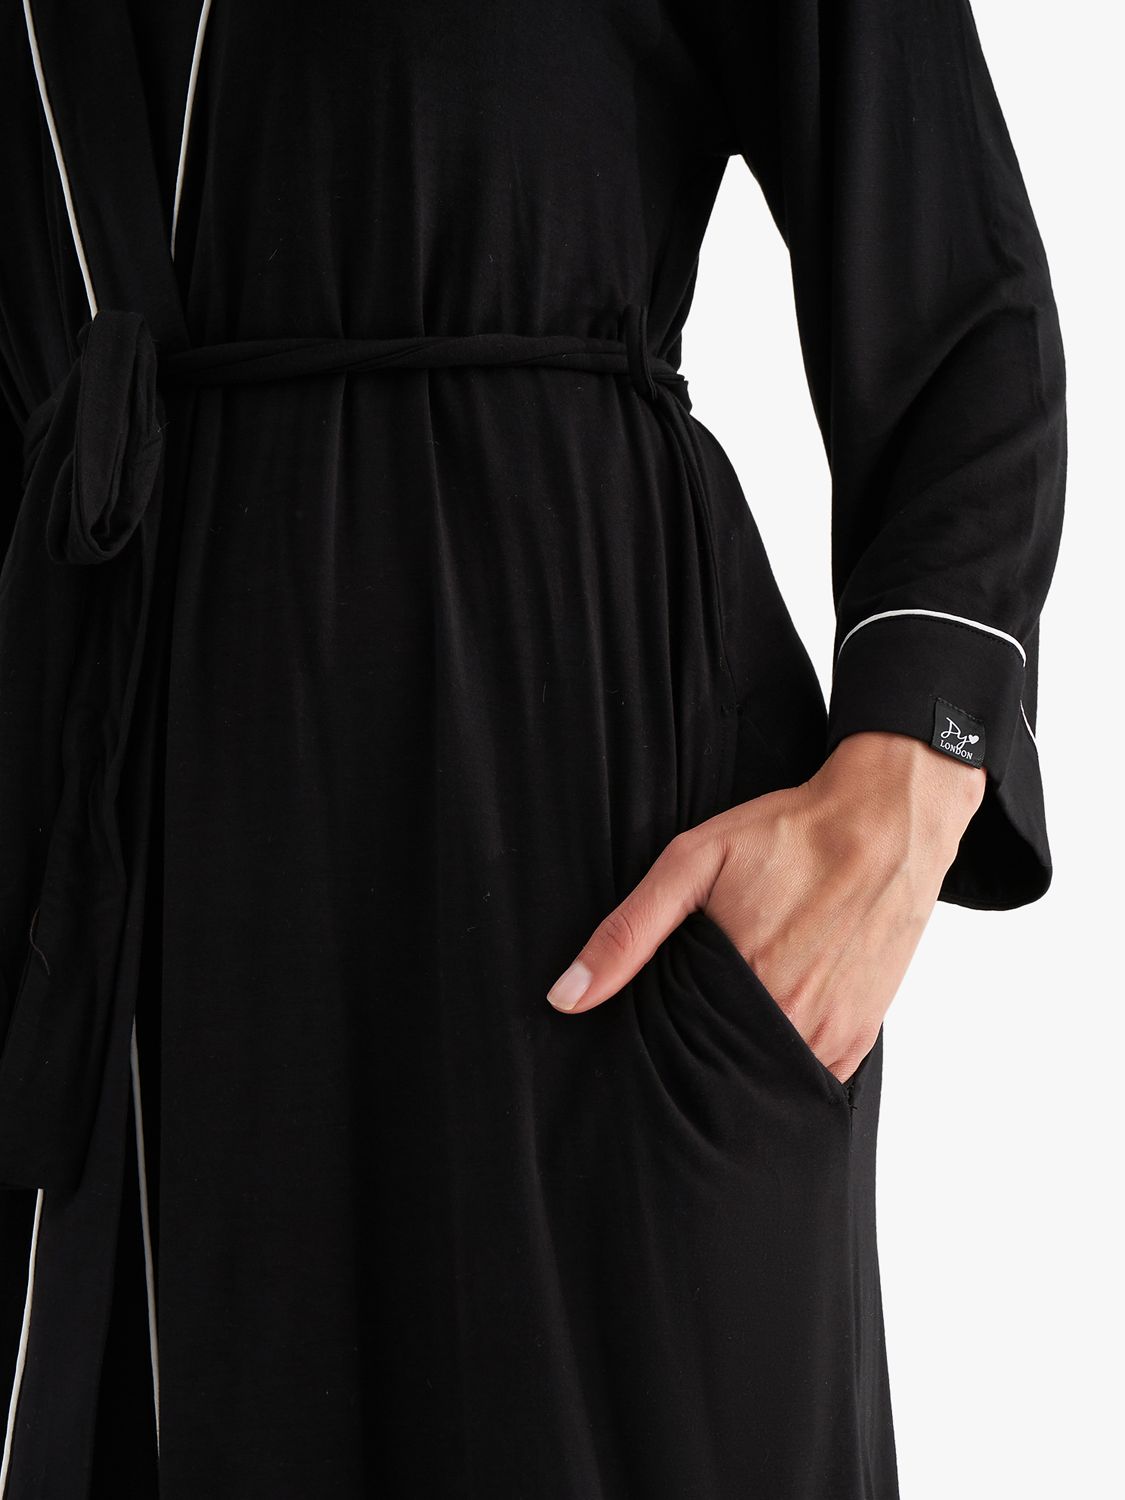 Buy Pretty You London Piping Trim Kimono Sleeve Bamboo Dressing Gown Online at johnlewis.com